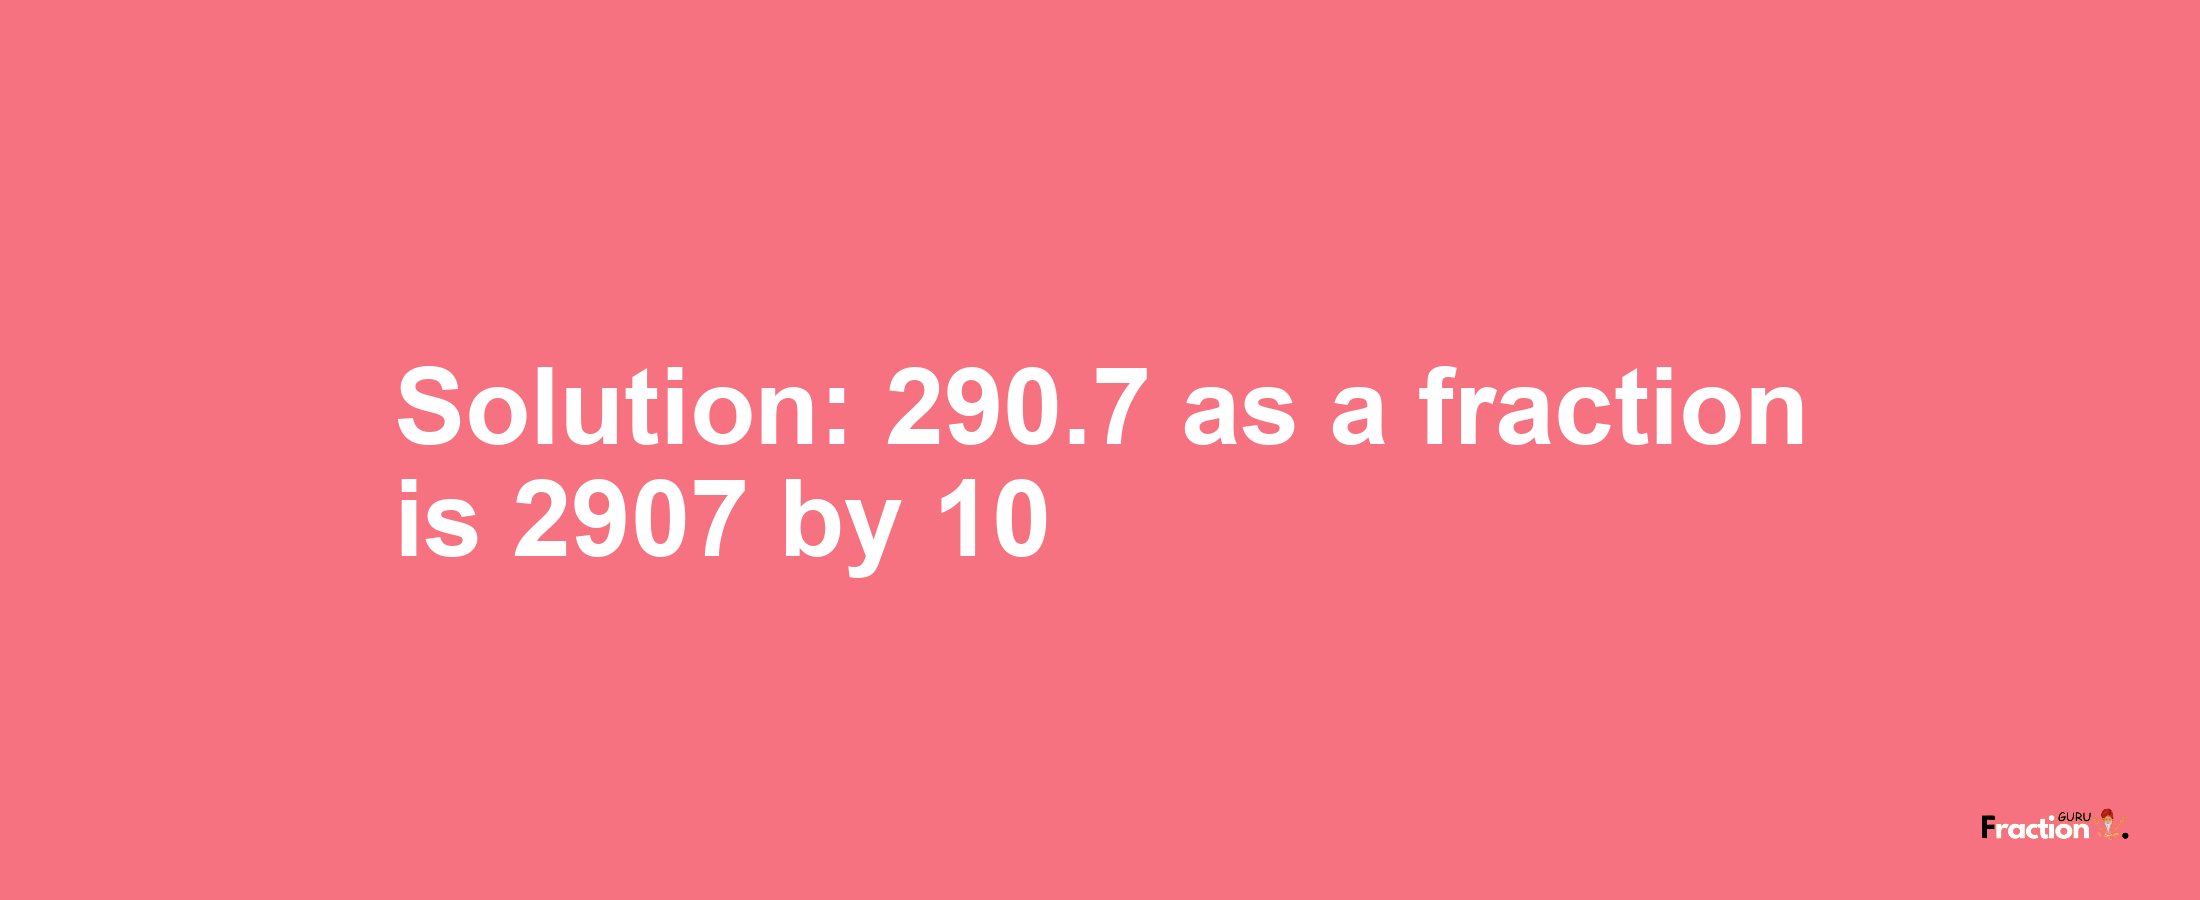 Solution:290.7 as a fraction is 2907/10